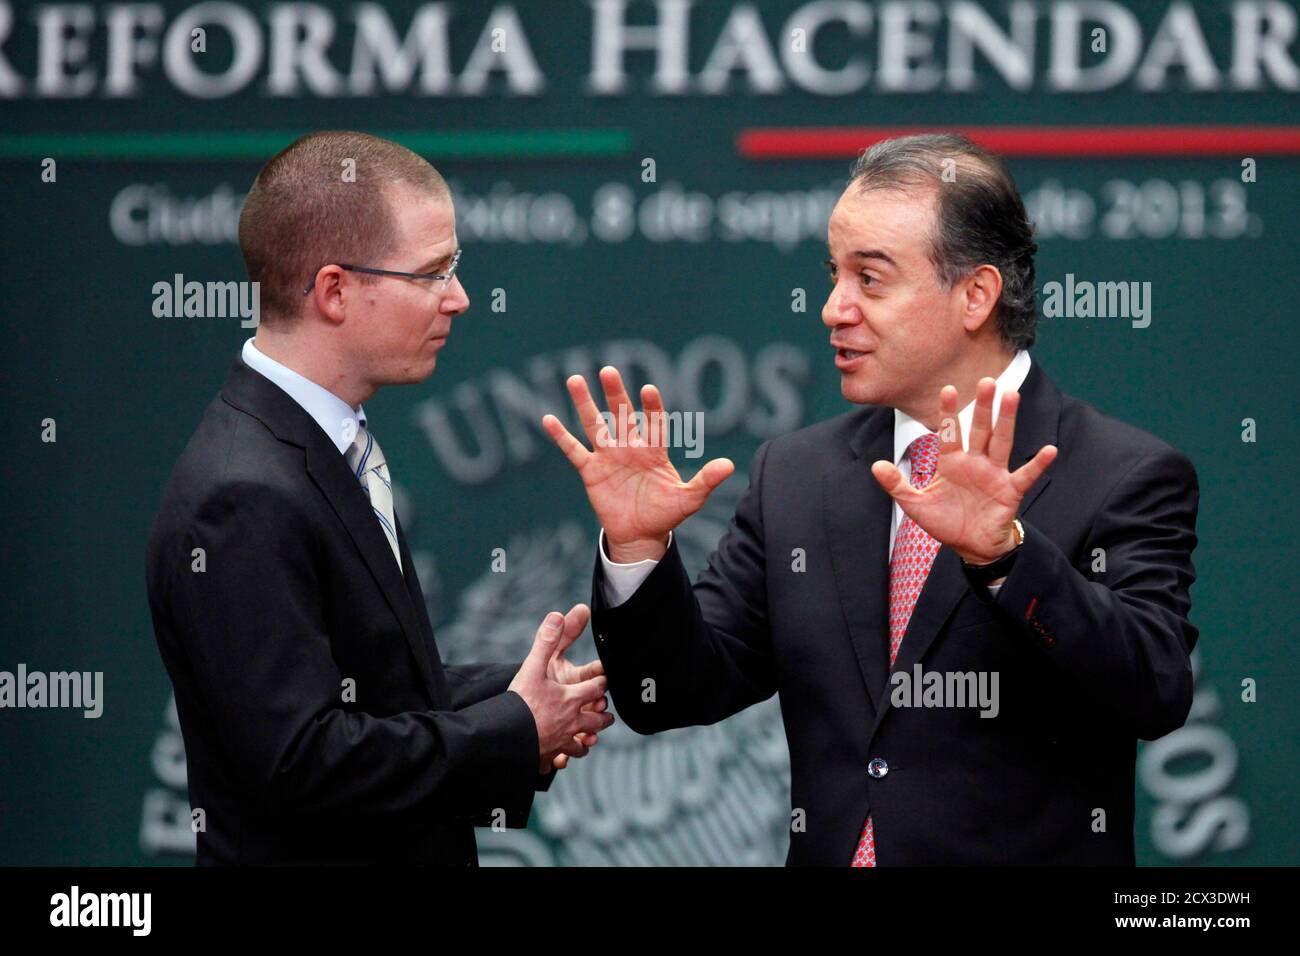 President of Mexico's Congress Ricardo Anaya (L) speaks with President of Mexico's Senate Raul Cervantes during the presentation of the fiscal reform at Los Pinos presidential residence in Mexico City, September 8, 2013. Mexico's government unveiled on Sunday a plan to increase taxes on higher income earners and levy a charge on stock market gains but shied away from widening a controversial sales tax amid an economic slowdown. The proposed reform will also include a universal pension, unemployment insurance and other measures to help the poor, who account for nearly half of the population, as Stock Photo